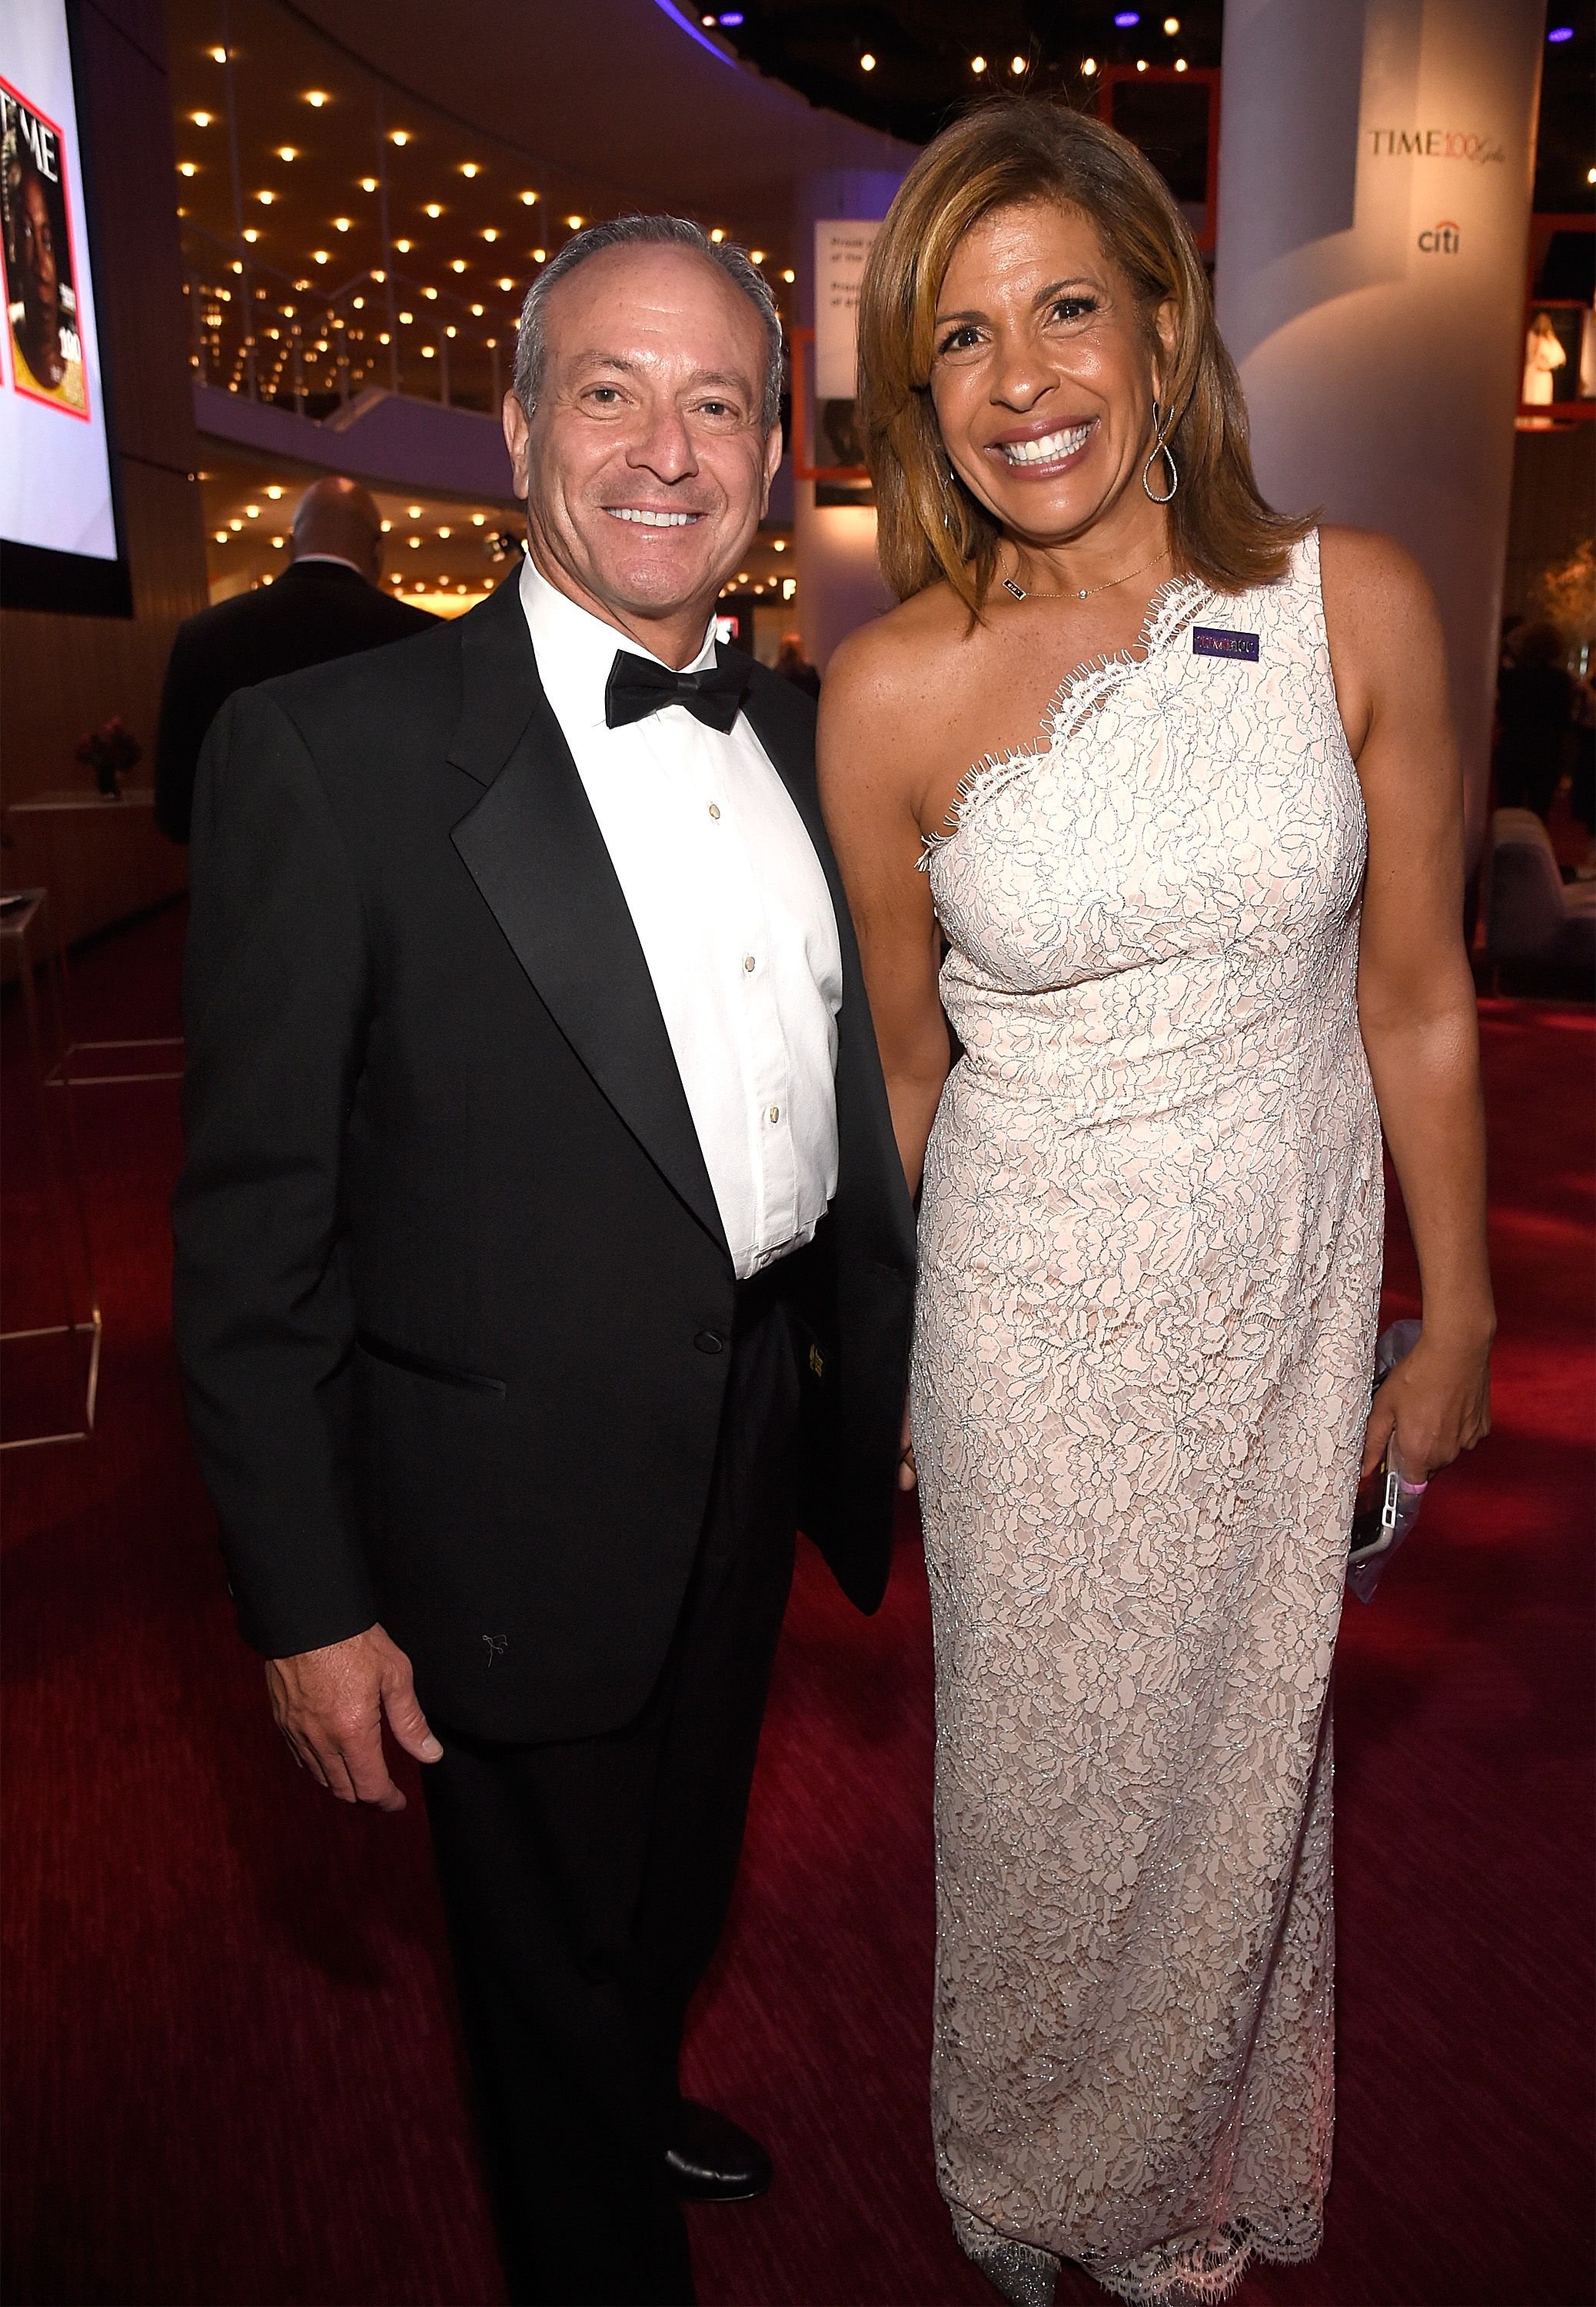  Joel Schiffman and Hoda Kotb attend the 2018 Time 100 Gala at Jazz at Lincoln Center on April 24, 2018 | Photo: Getty Images